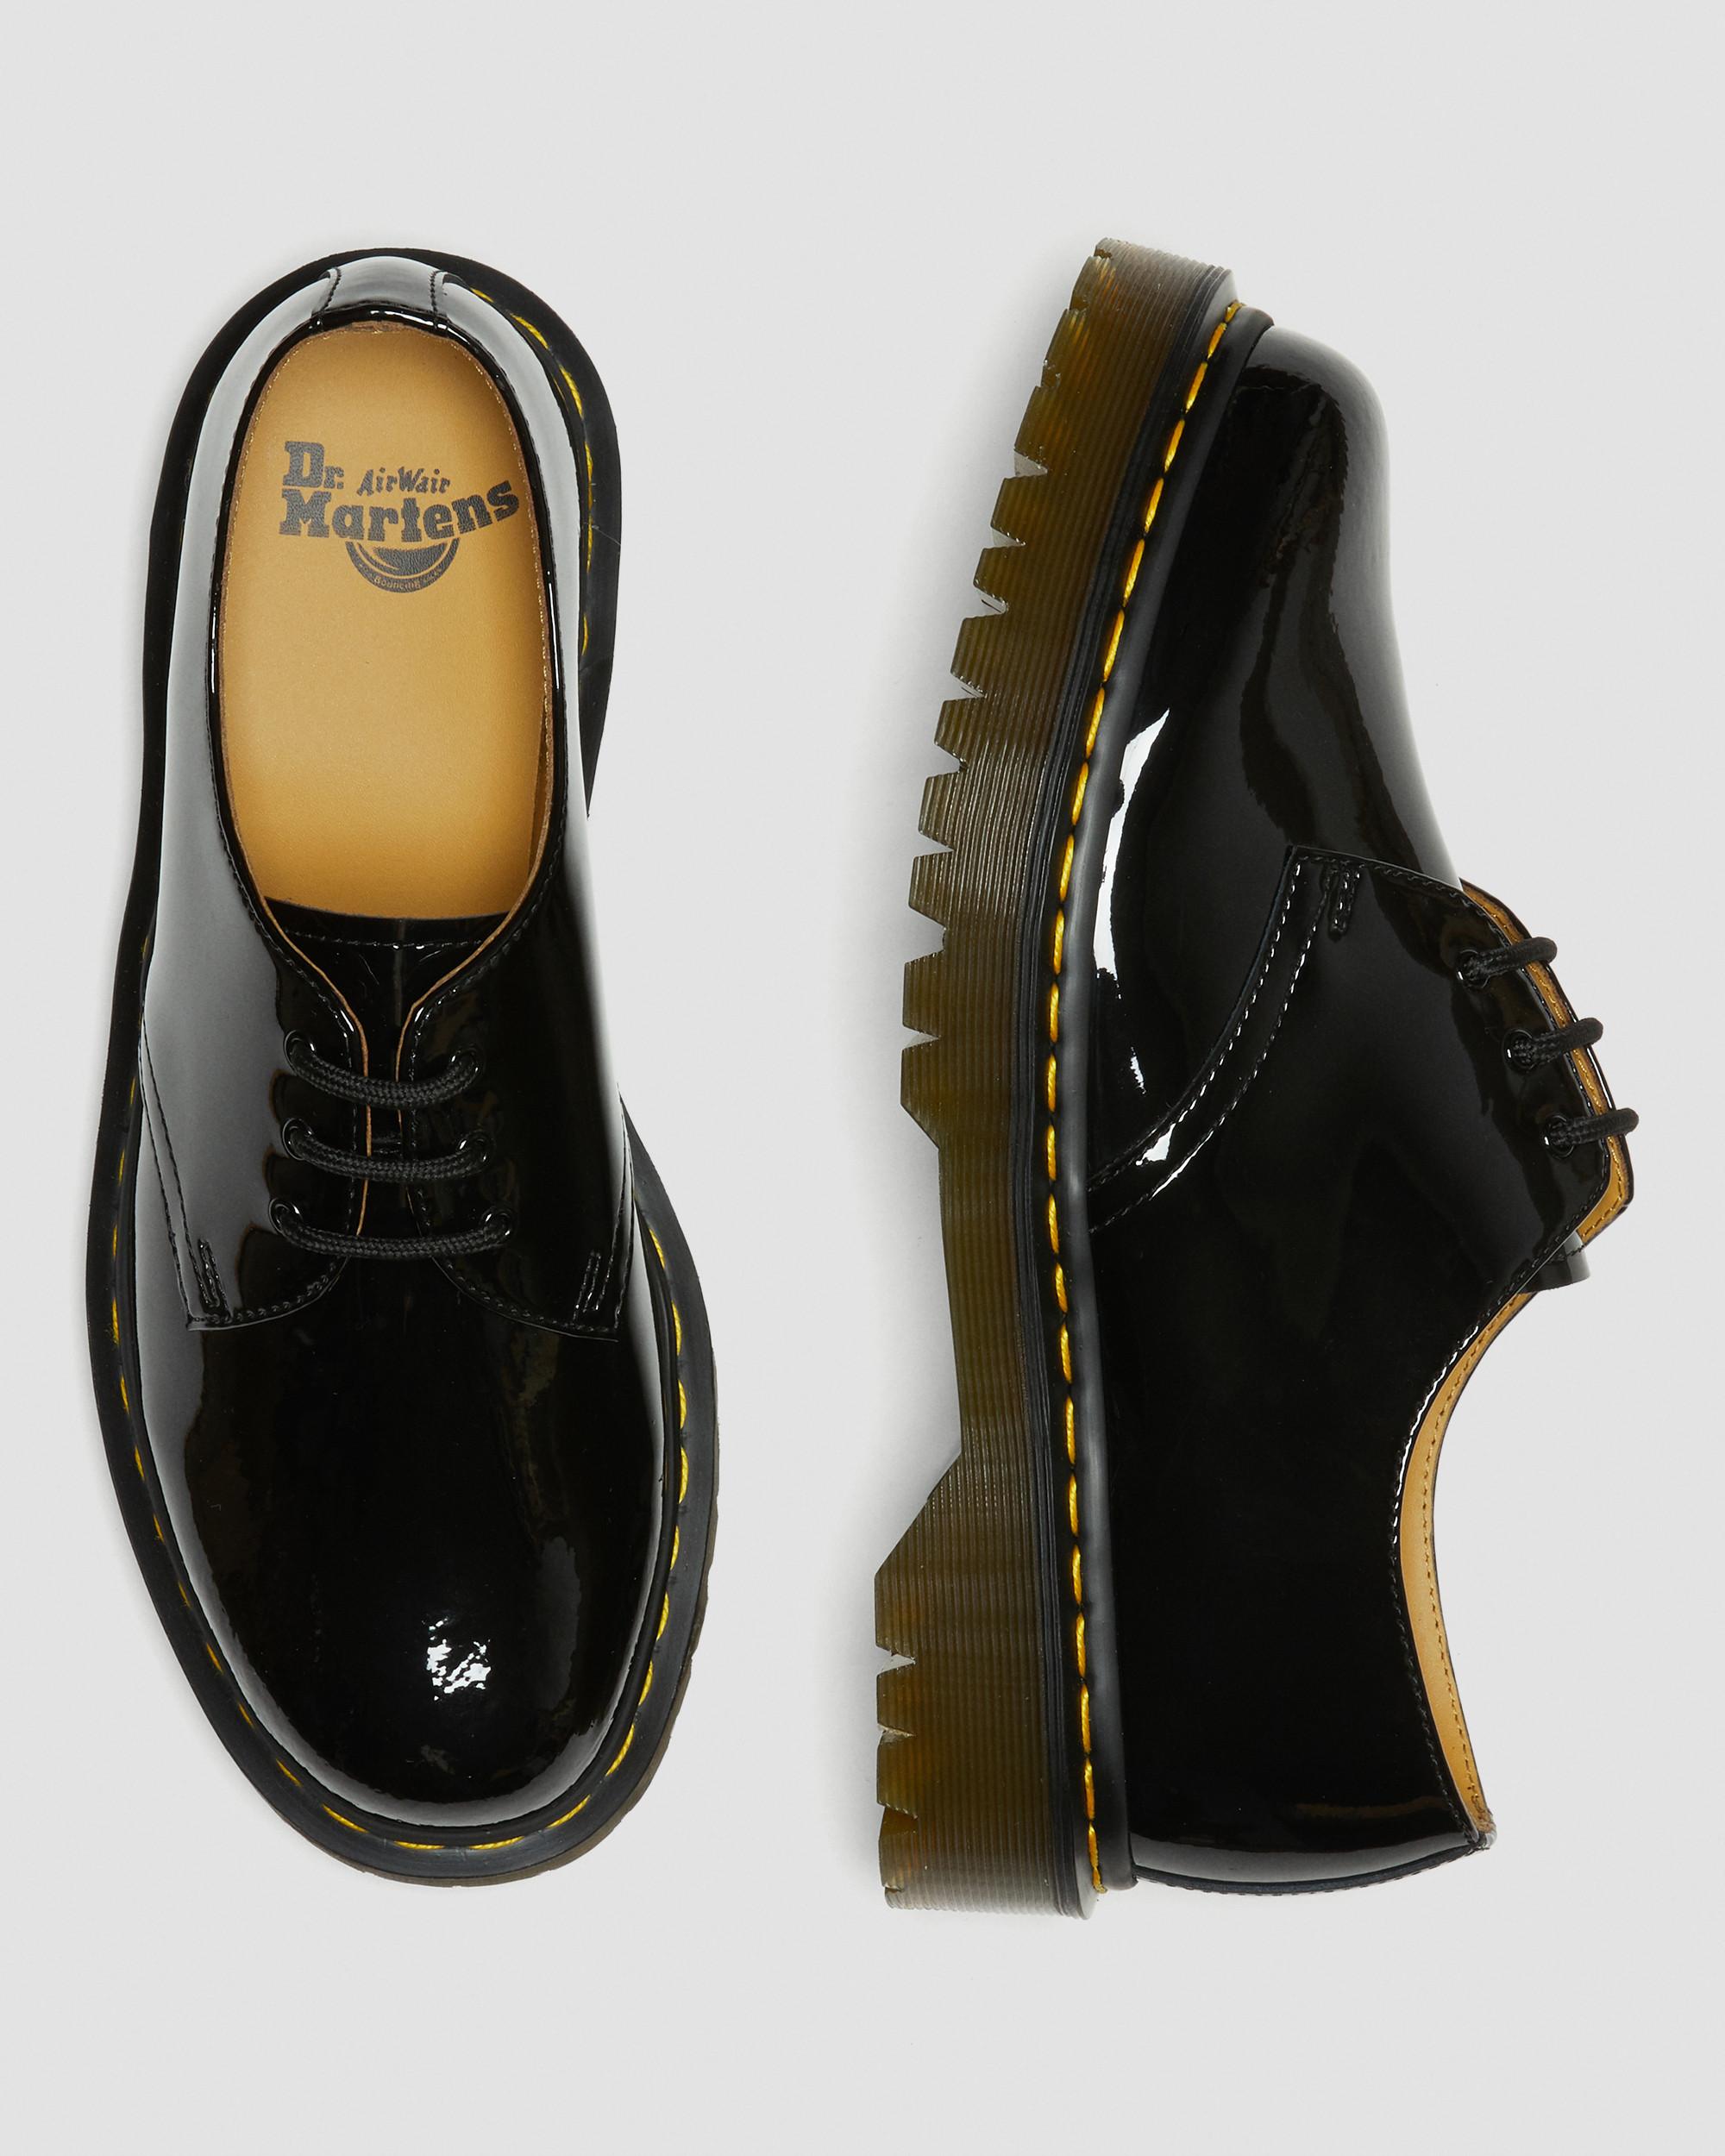 DR MARTENS 1461 Bex Patent Leather Oxford Shoes